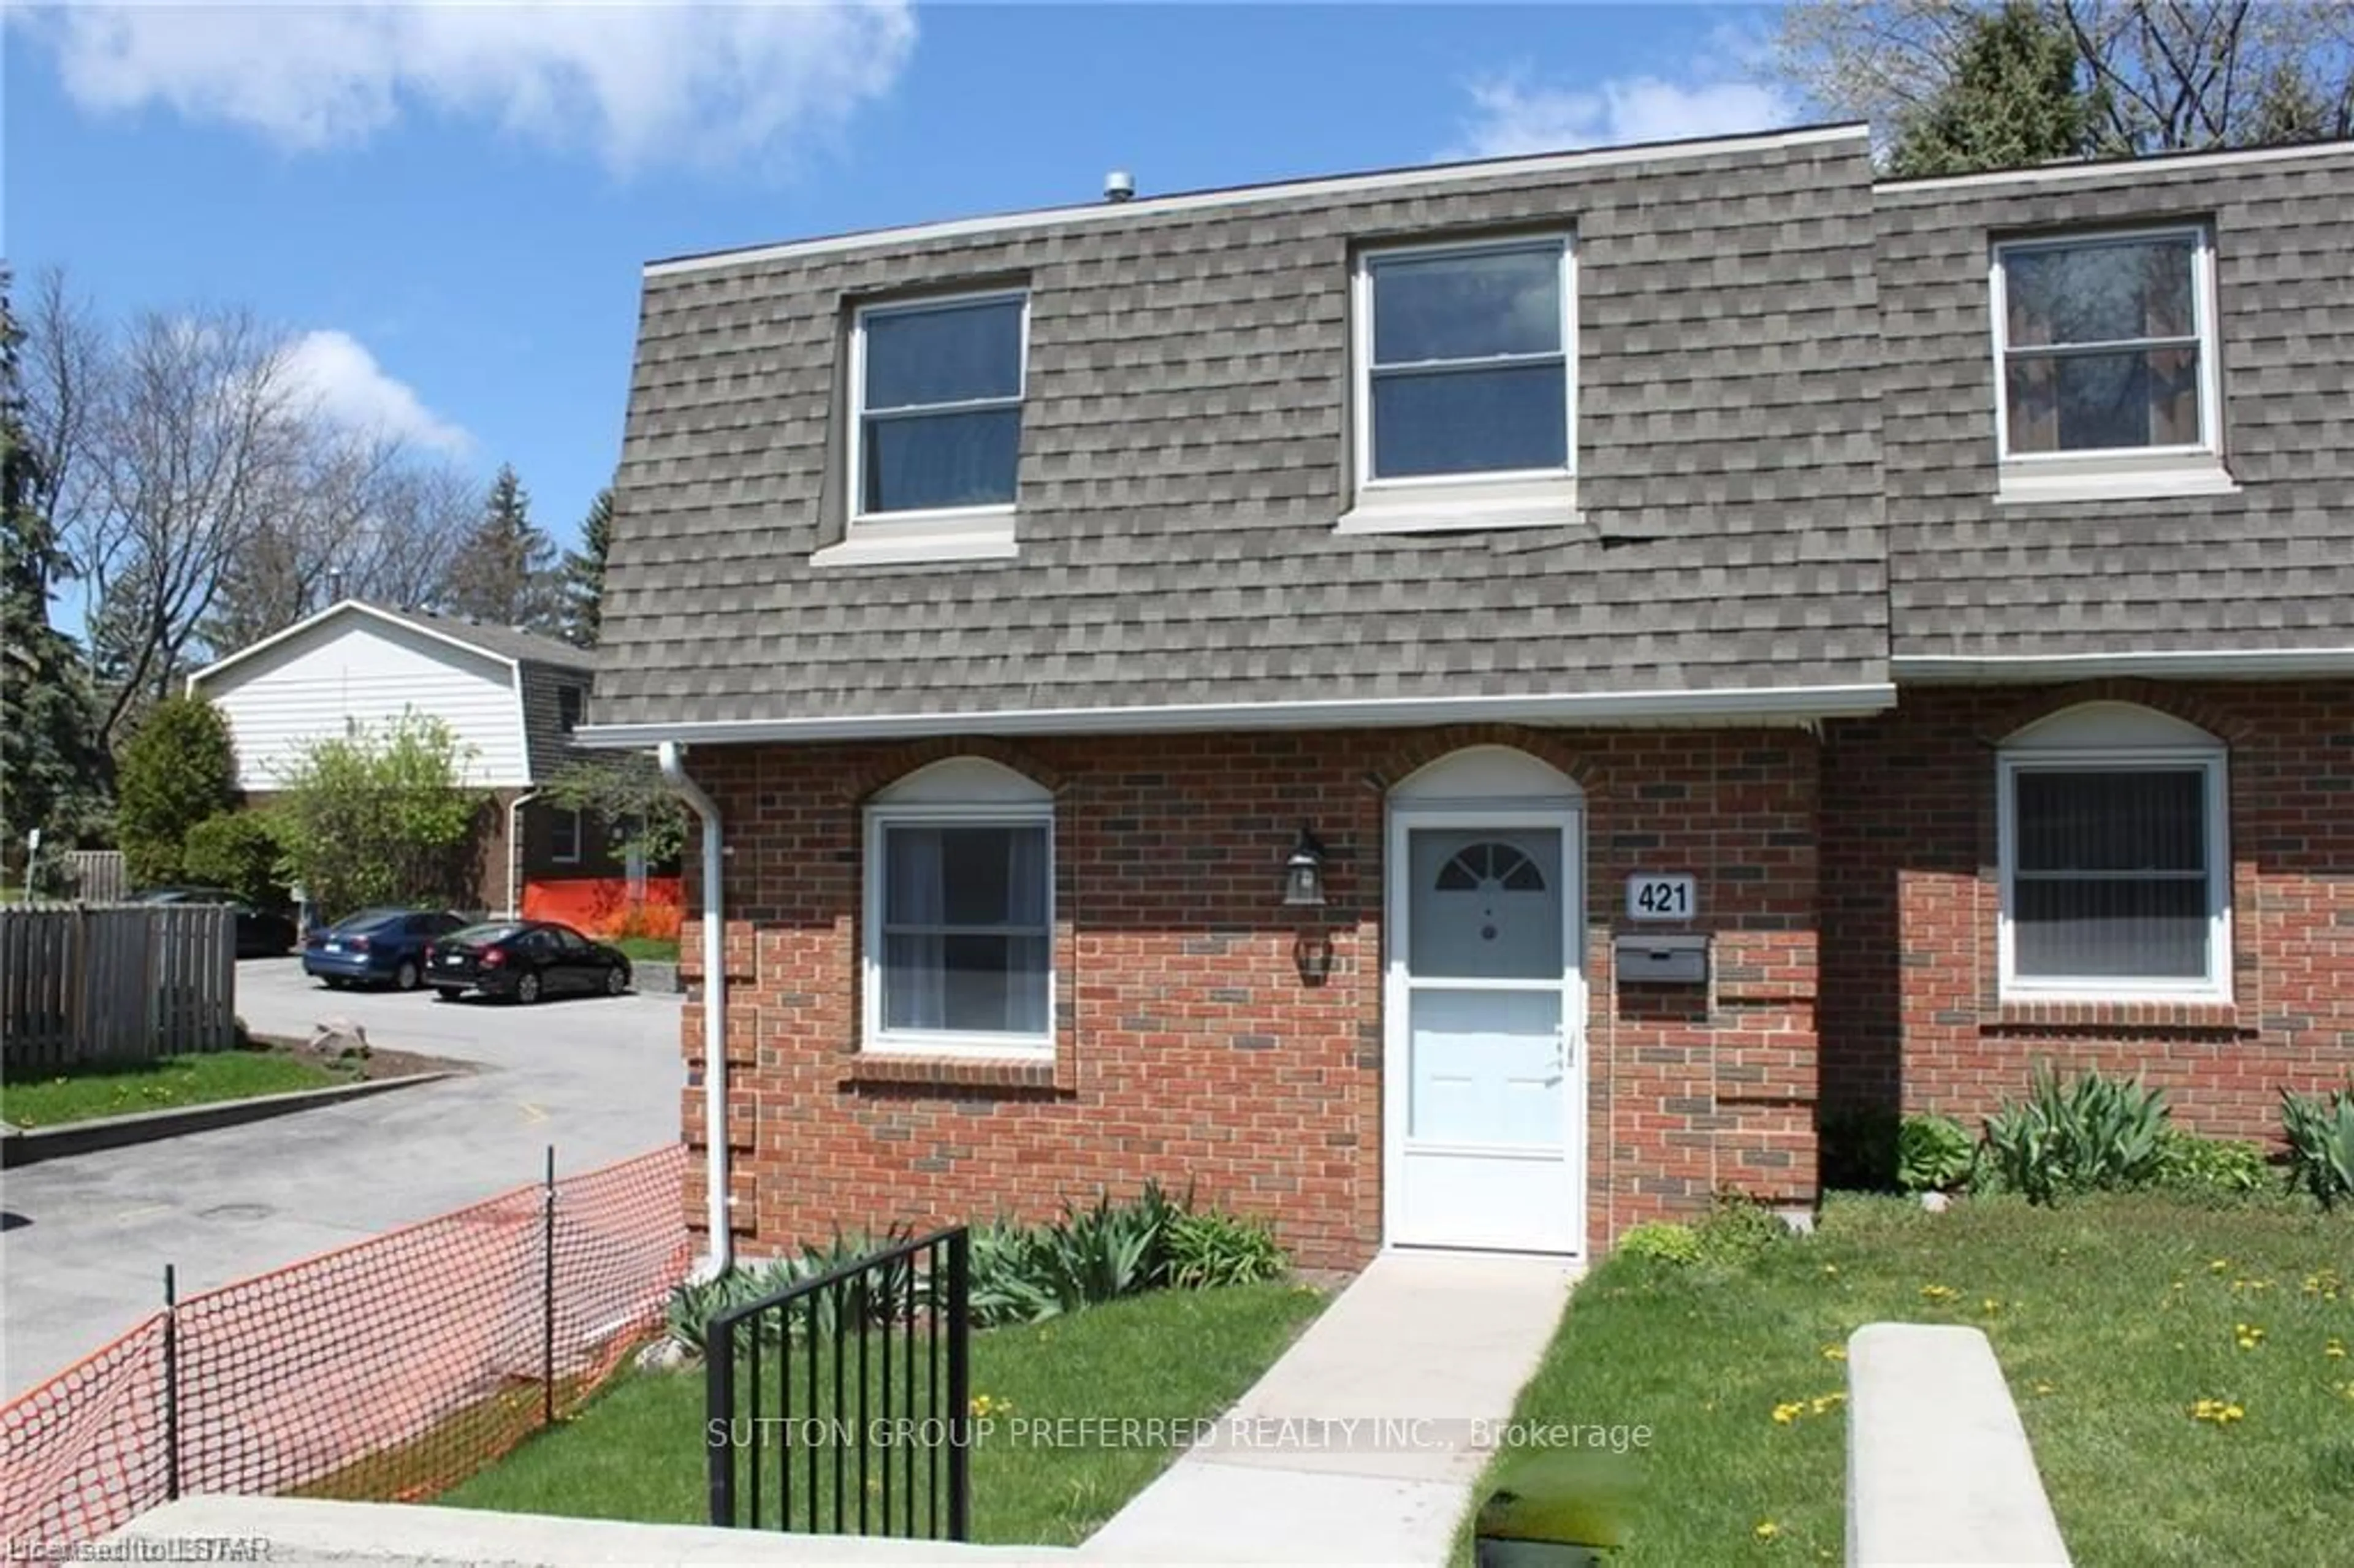 Home with brick exterior material for 421 Wilkins St #421, London Ontario N6C 5B5